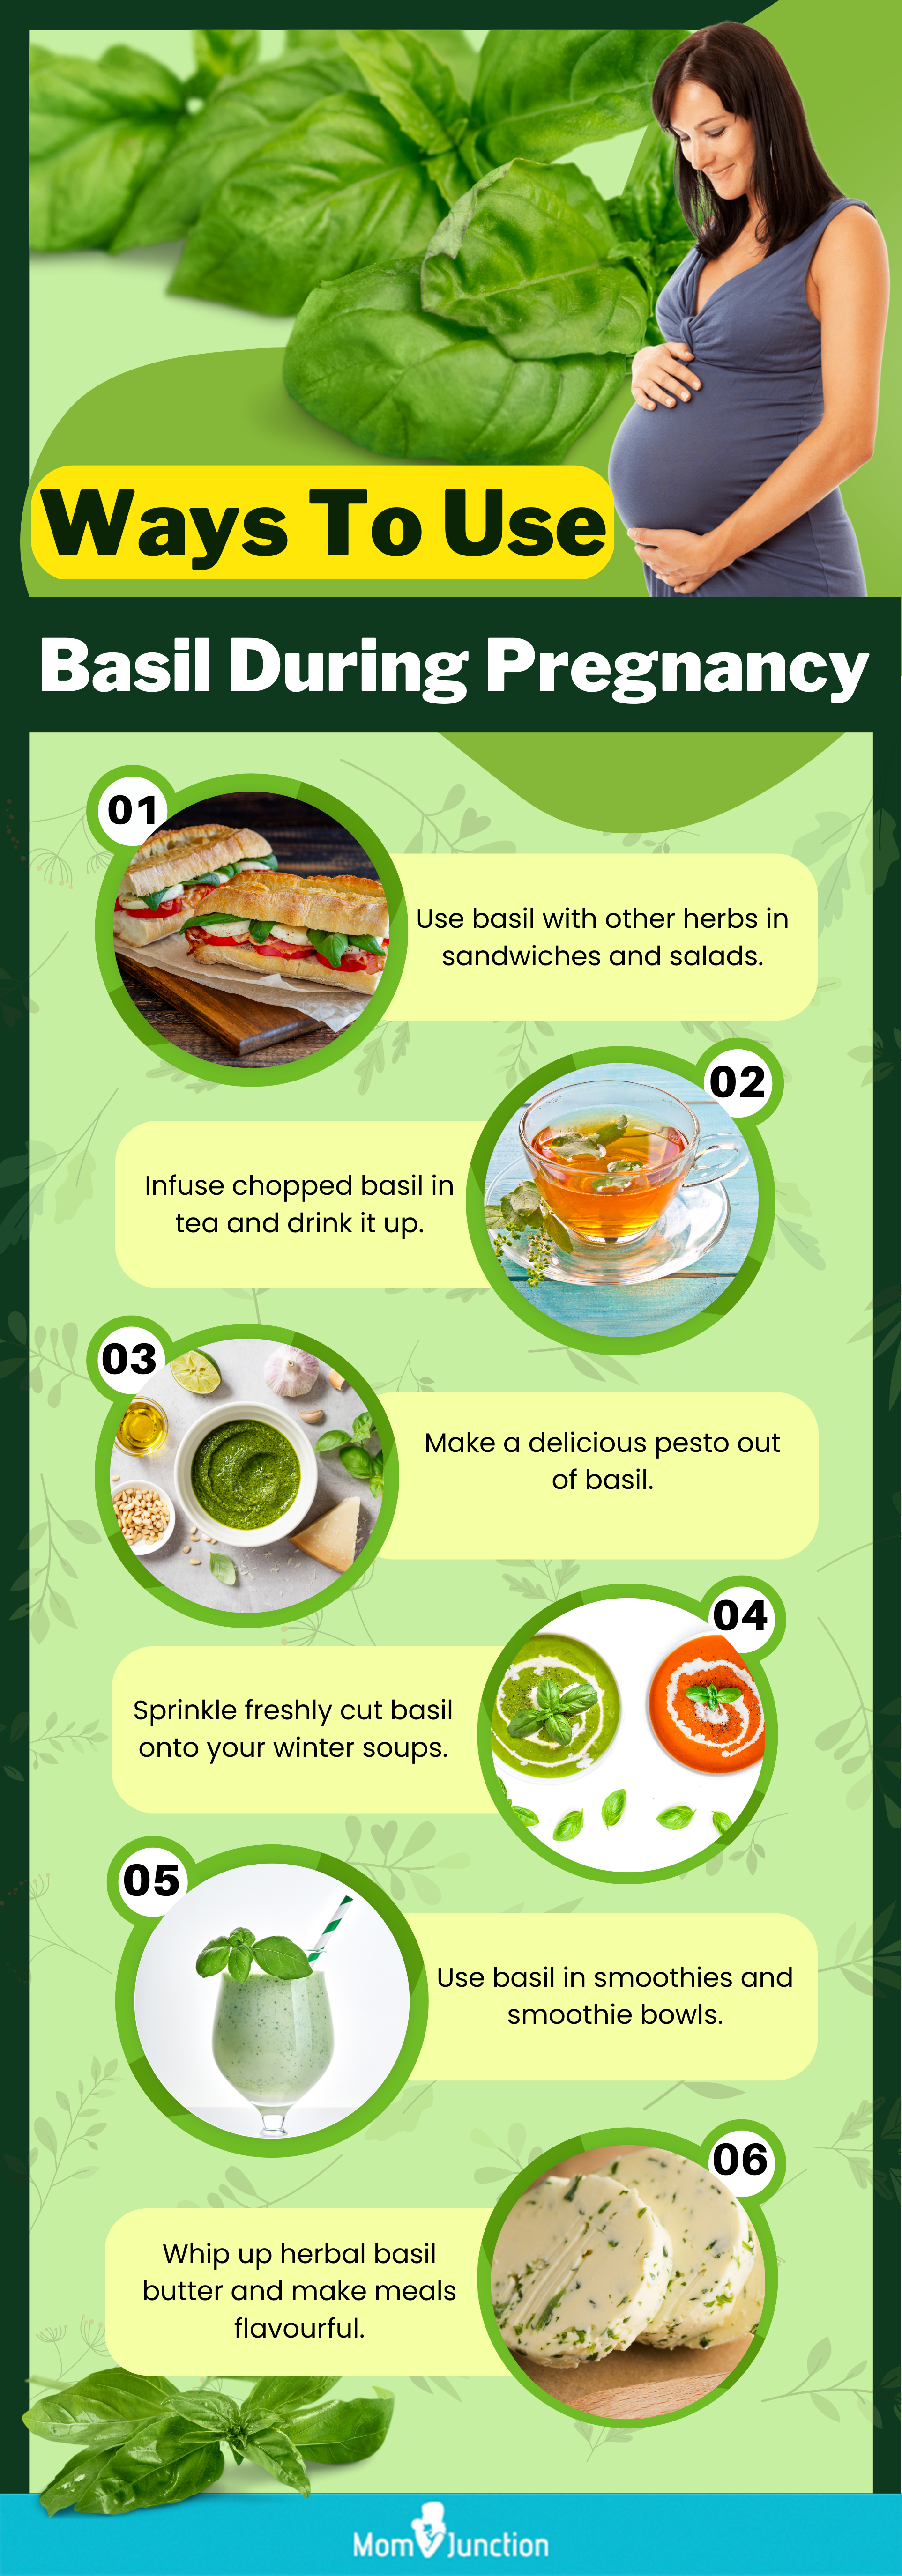 ways to use basil during pregnancy (infographic)